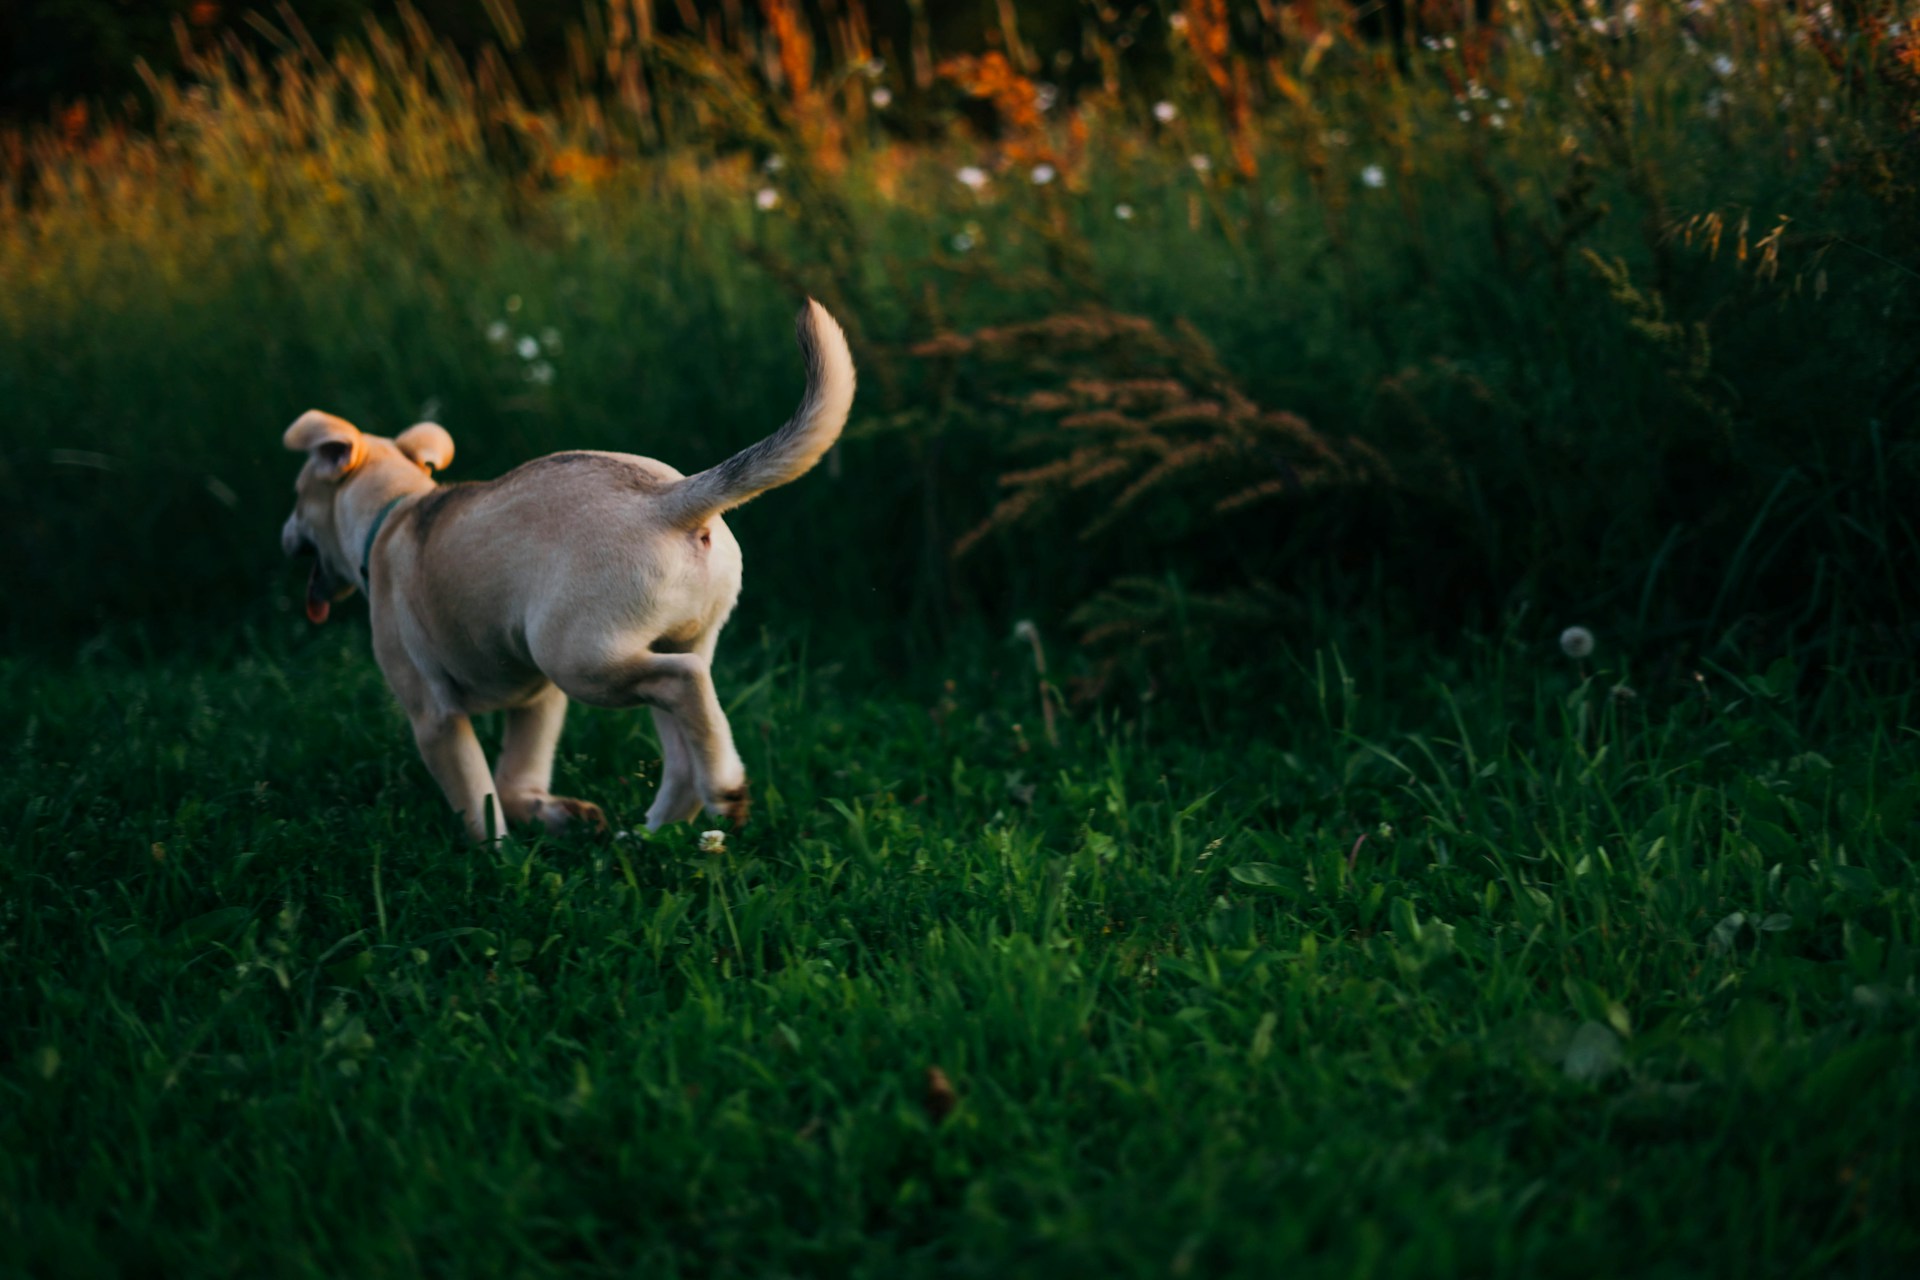 A small white dog running away into a field